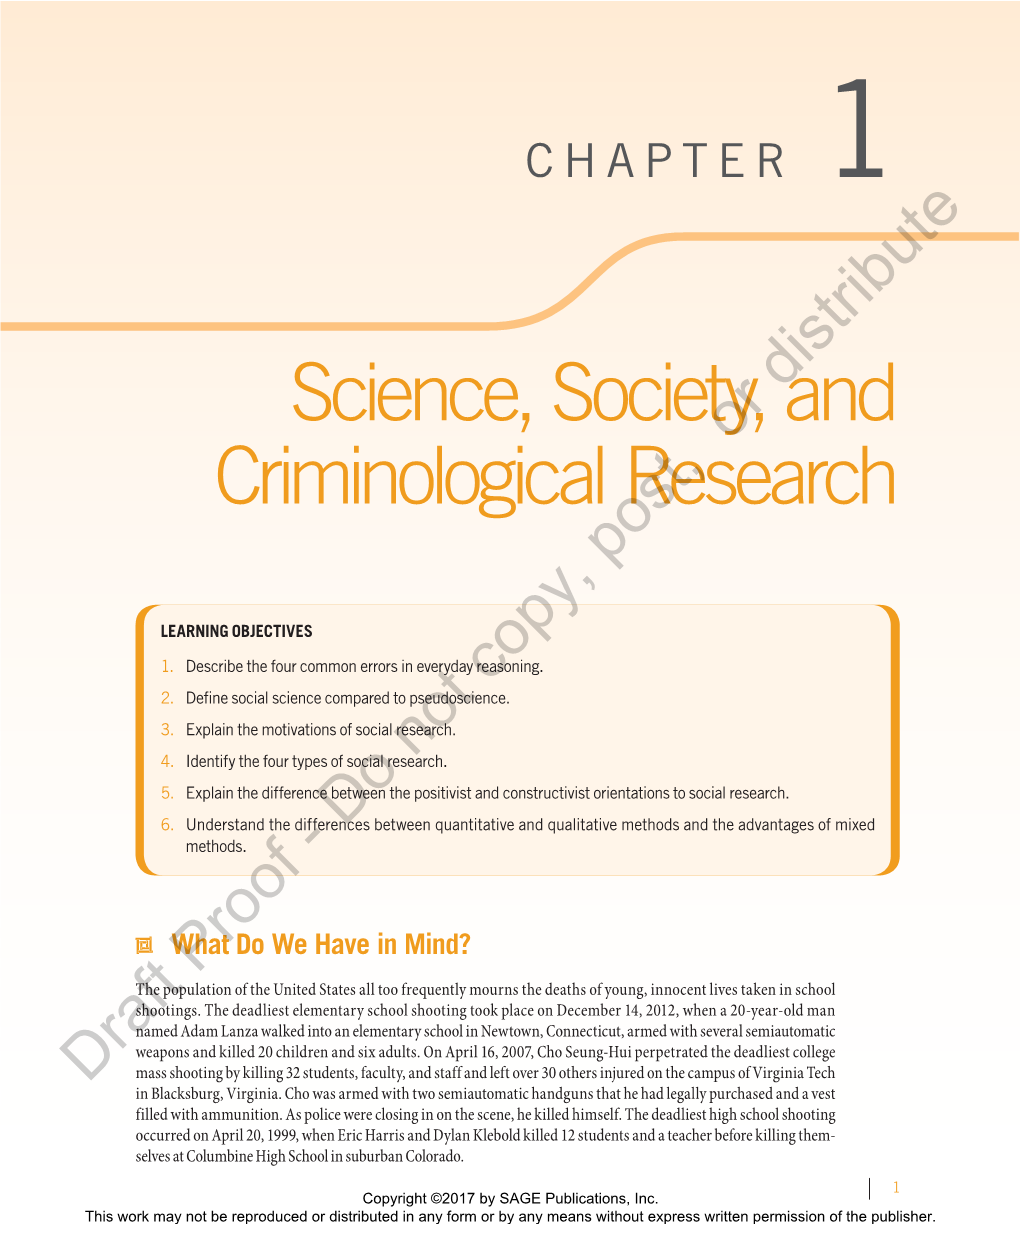 Science, Society, and Criminological Research